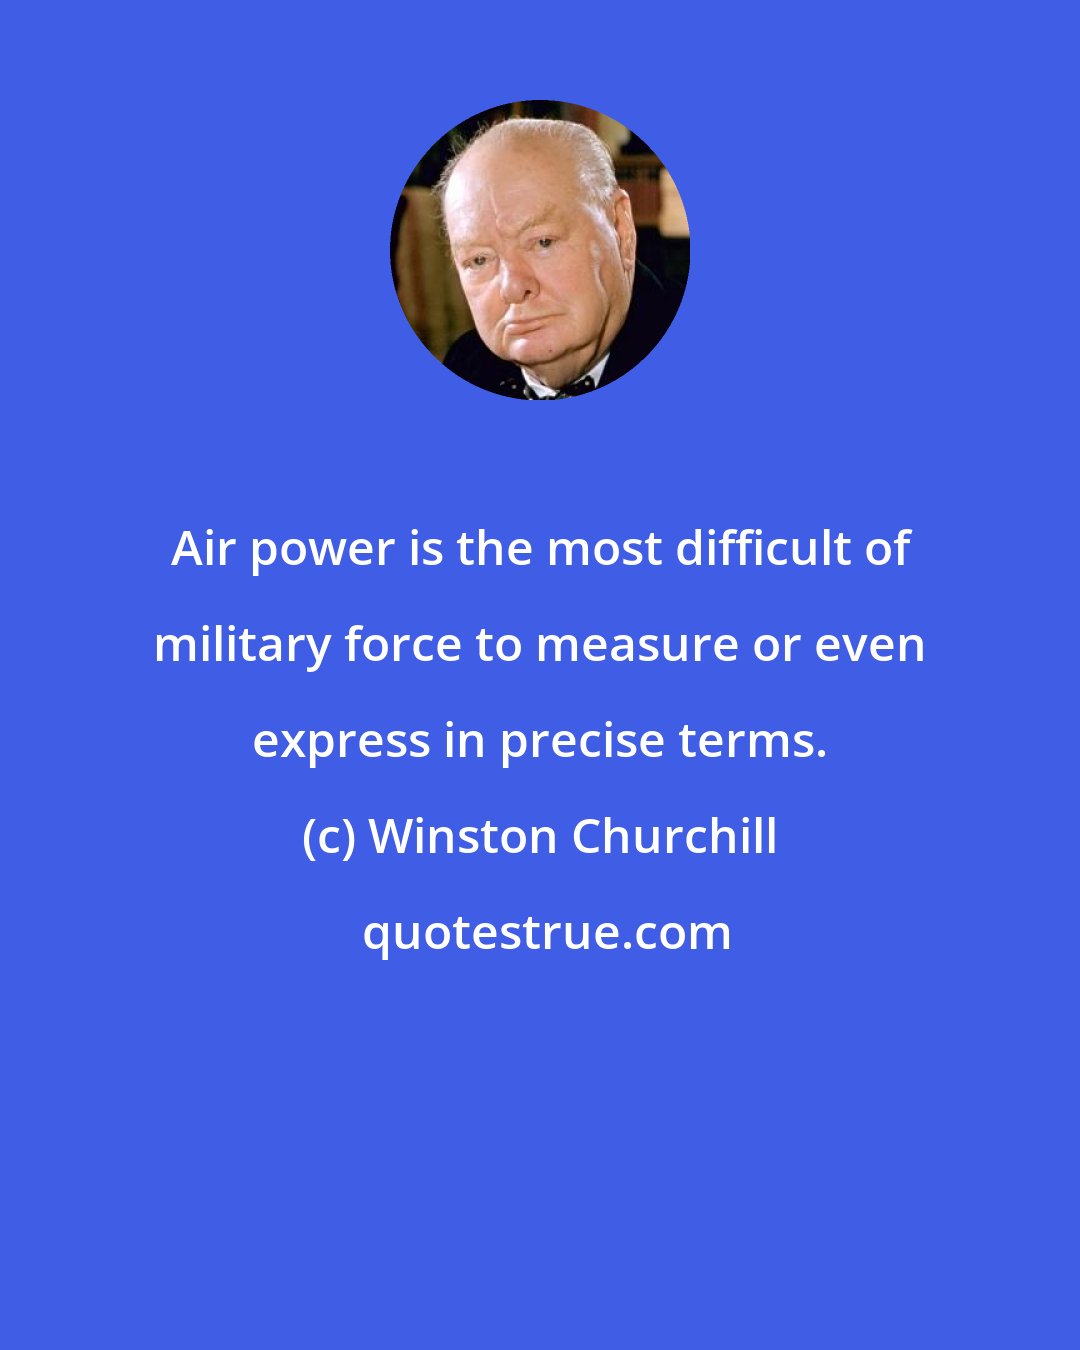 Winston Churchill: Air power is the most difficult of military force to measure or even express in precise terms.